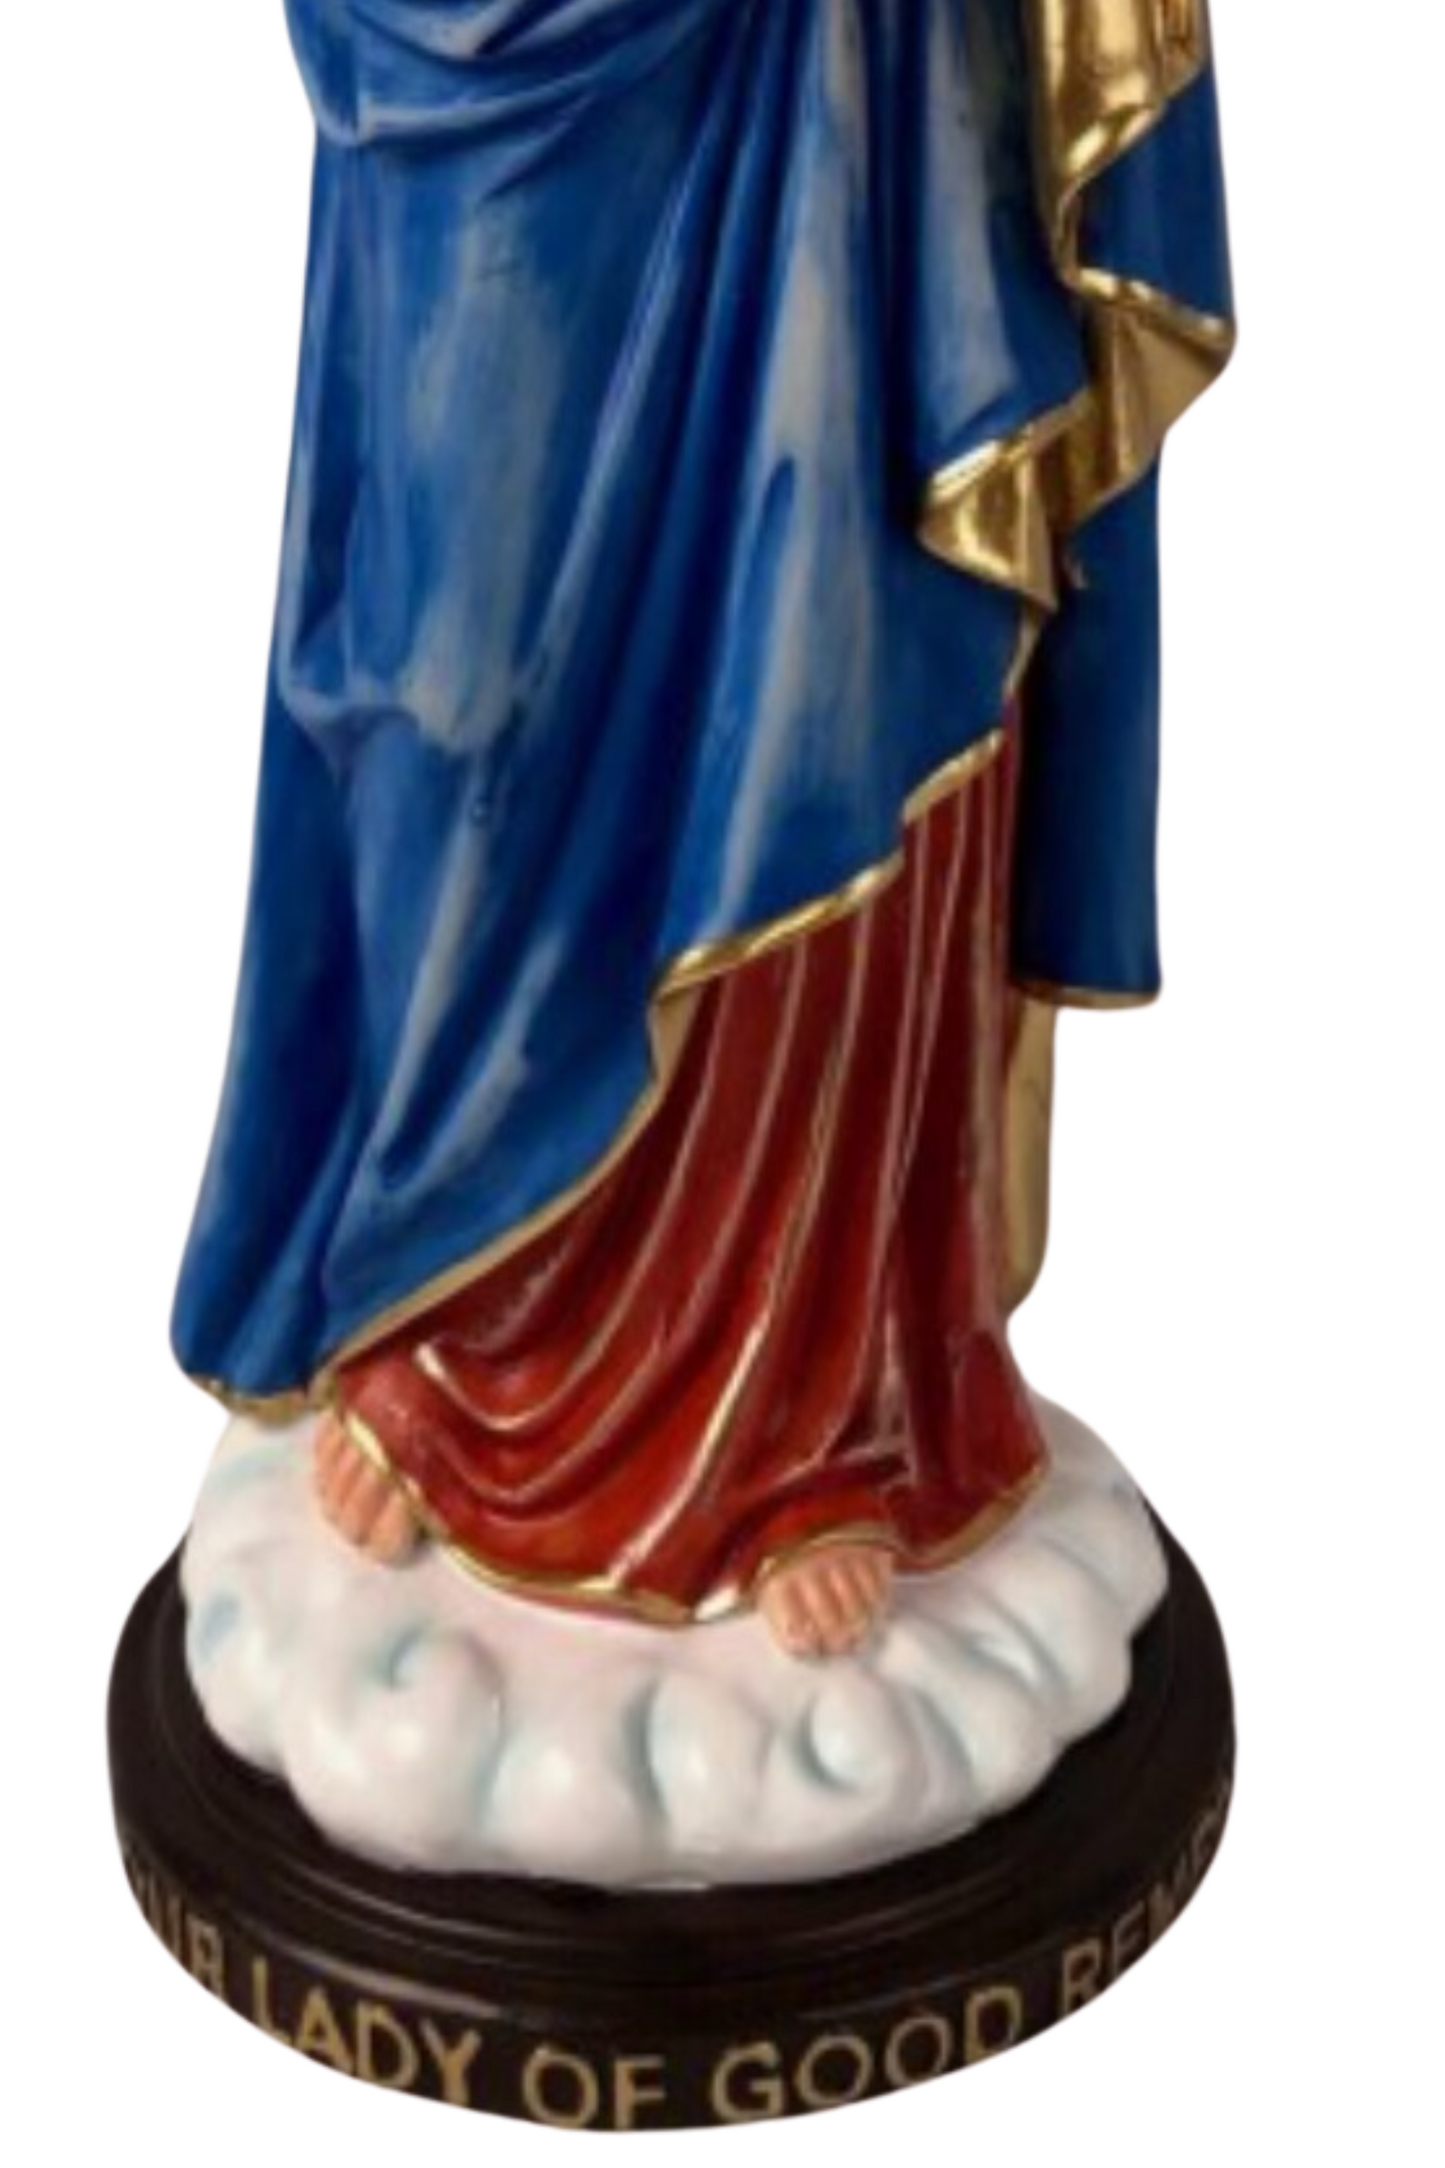 14 inch Our Lady of Good Remedy Statue hand made in Colombia - Bob and Penny Lord